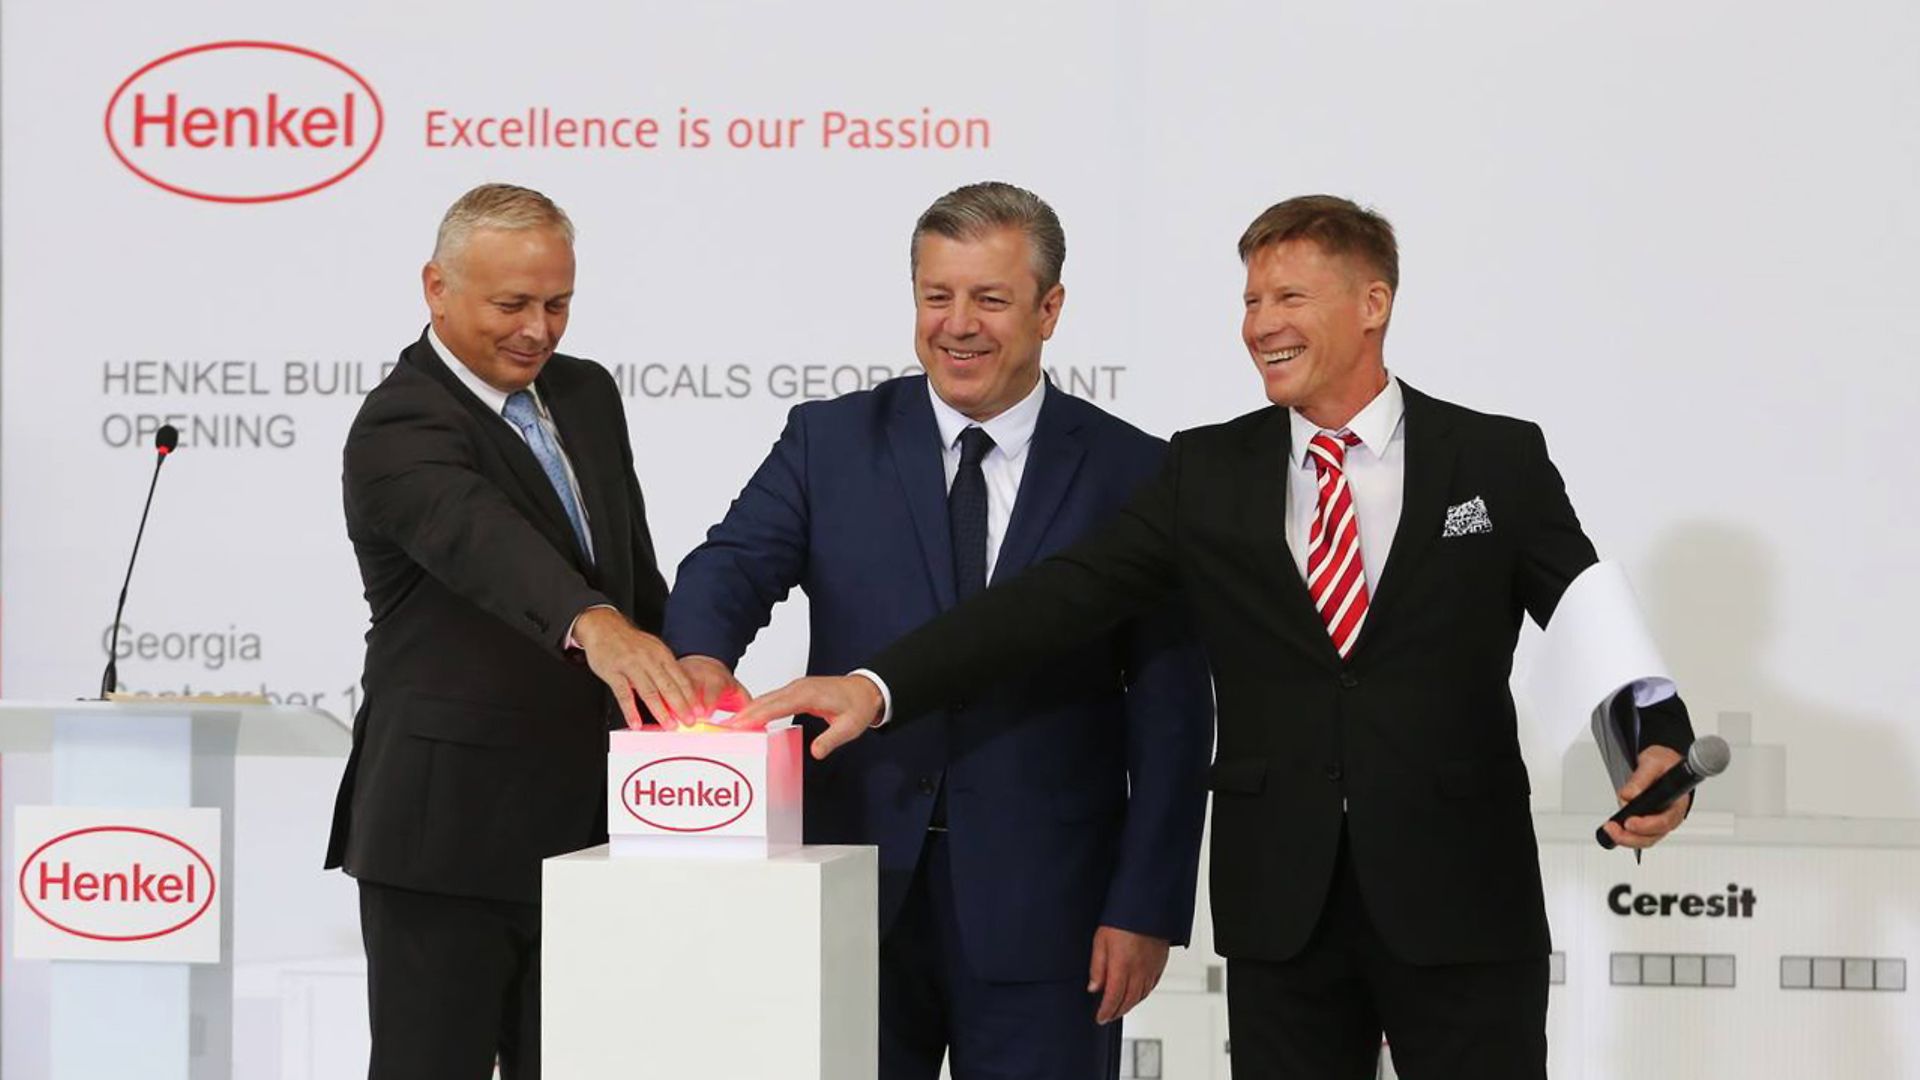 From the left: Zdenek Brich, Director for Building Materials at Henkel Adhesive Technologies, together with Georgian Prime Minister Giorgi Kvirikashvili and Alexey Ananishnov, General Manager at Henkel Consumer Adhesives for Russia and the Caucasus region